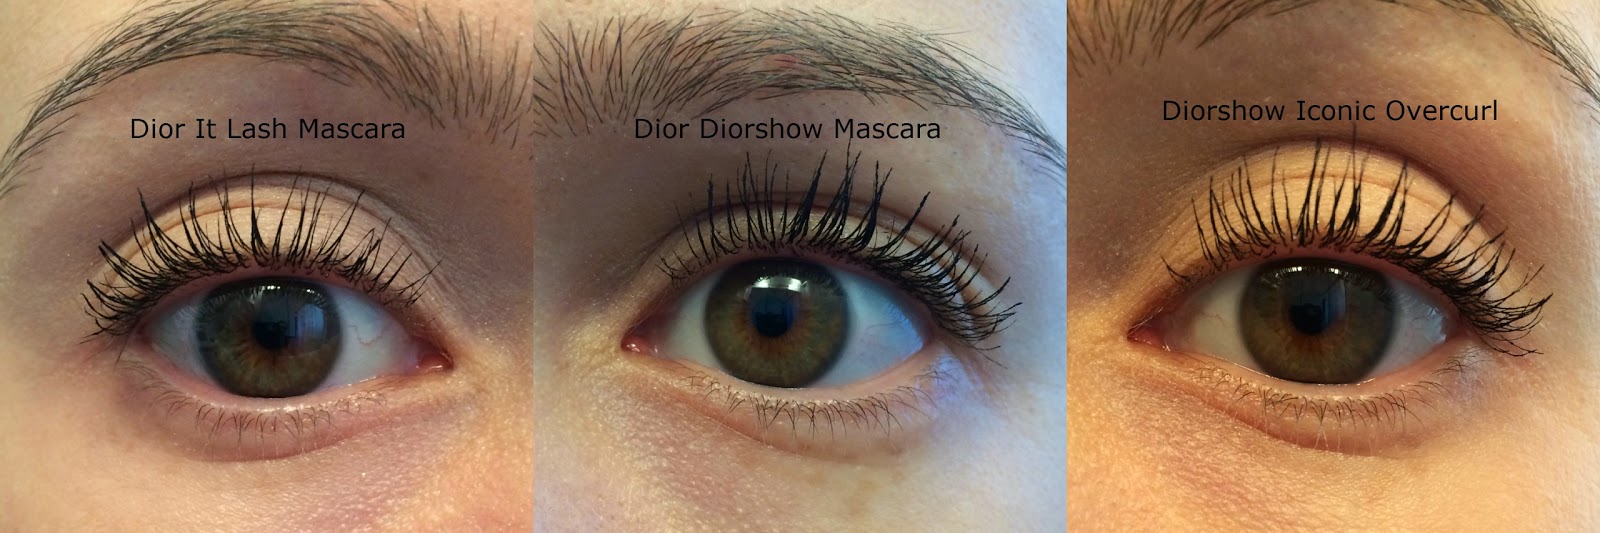 diorshow iconic overcurl review